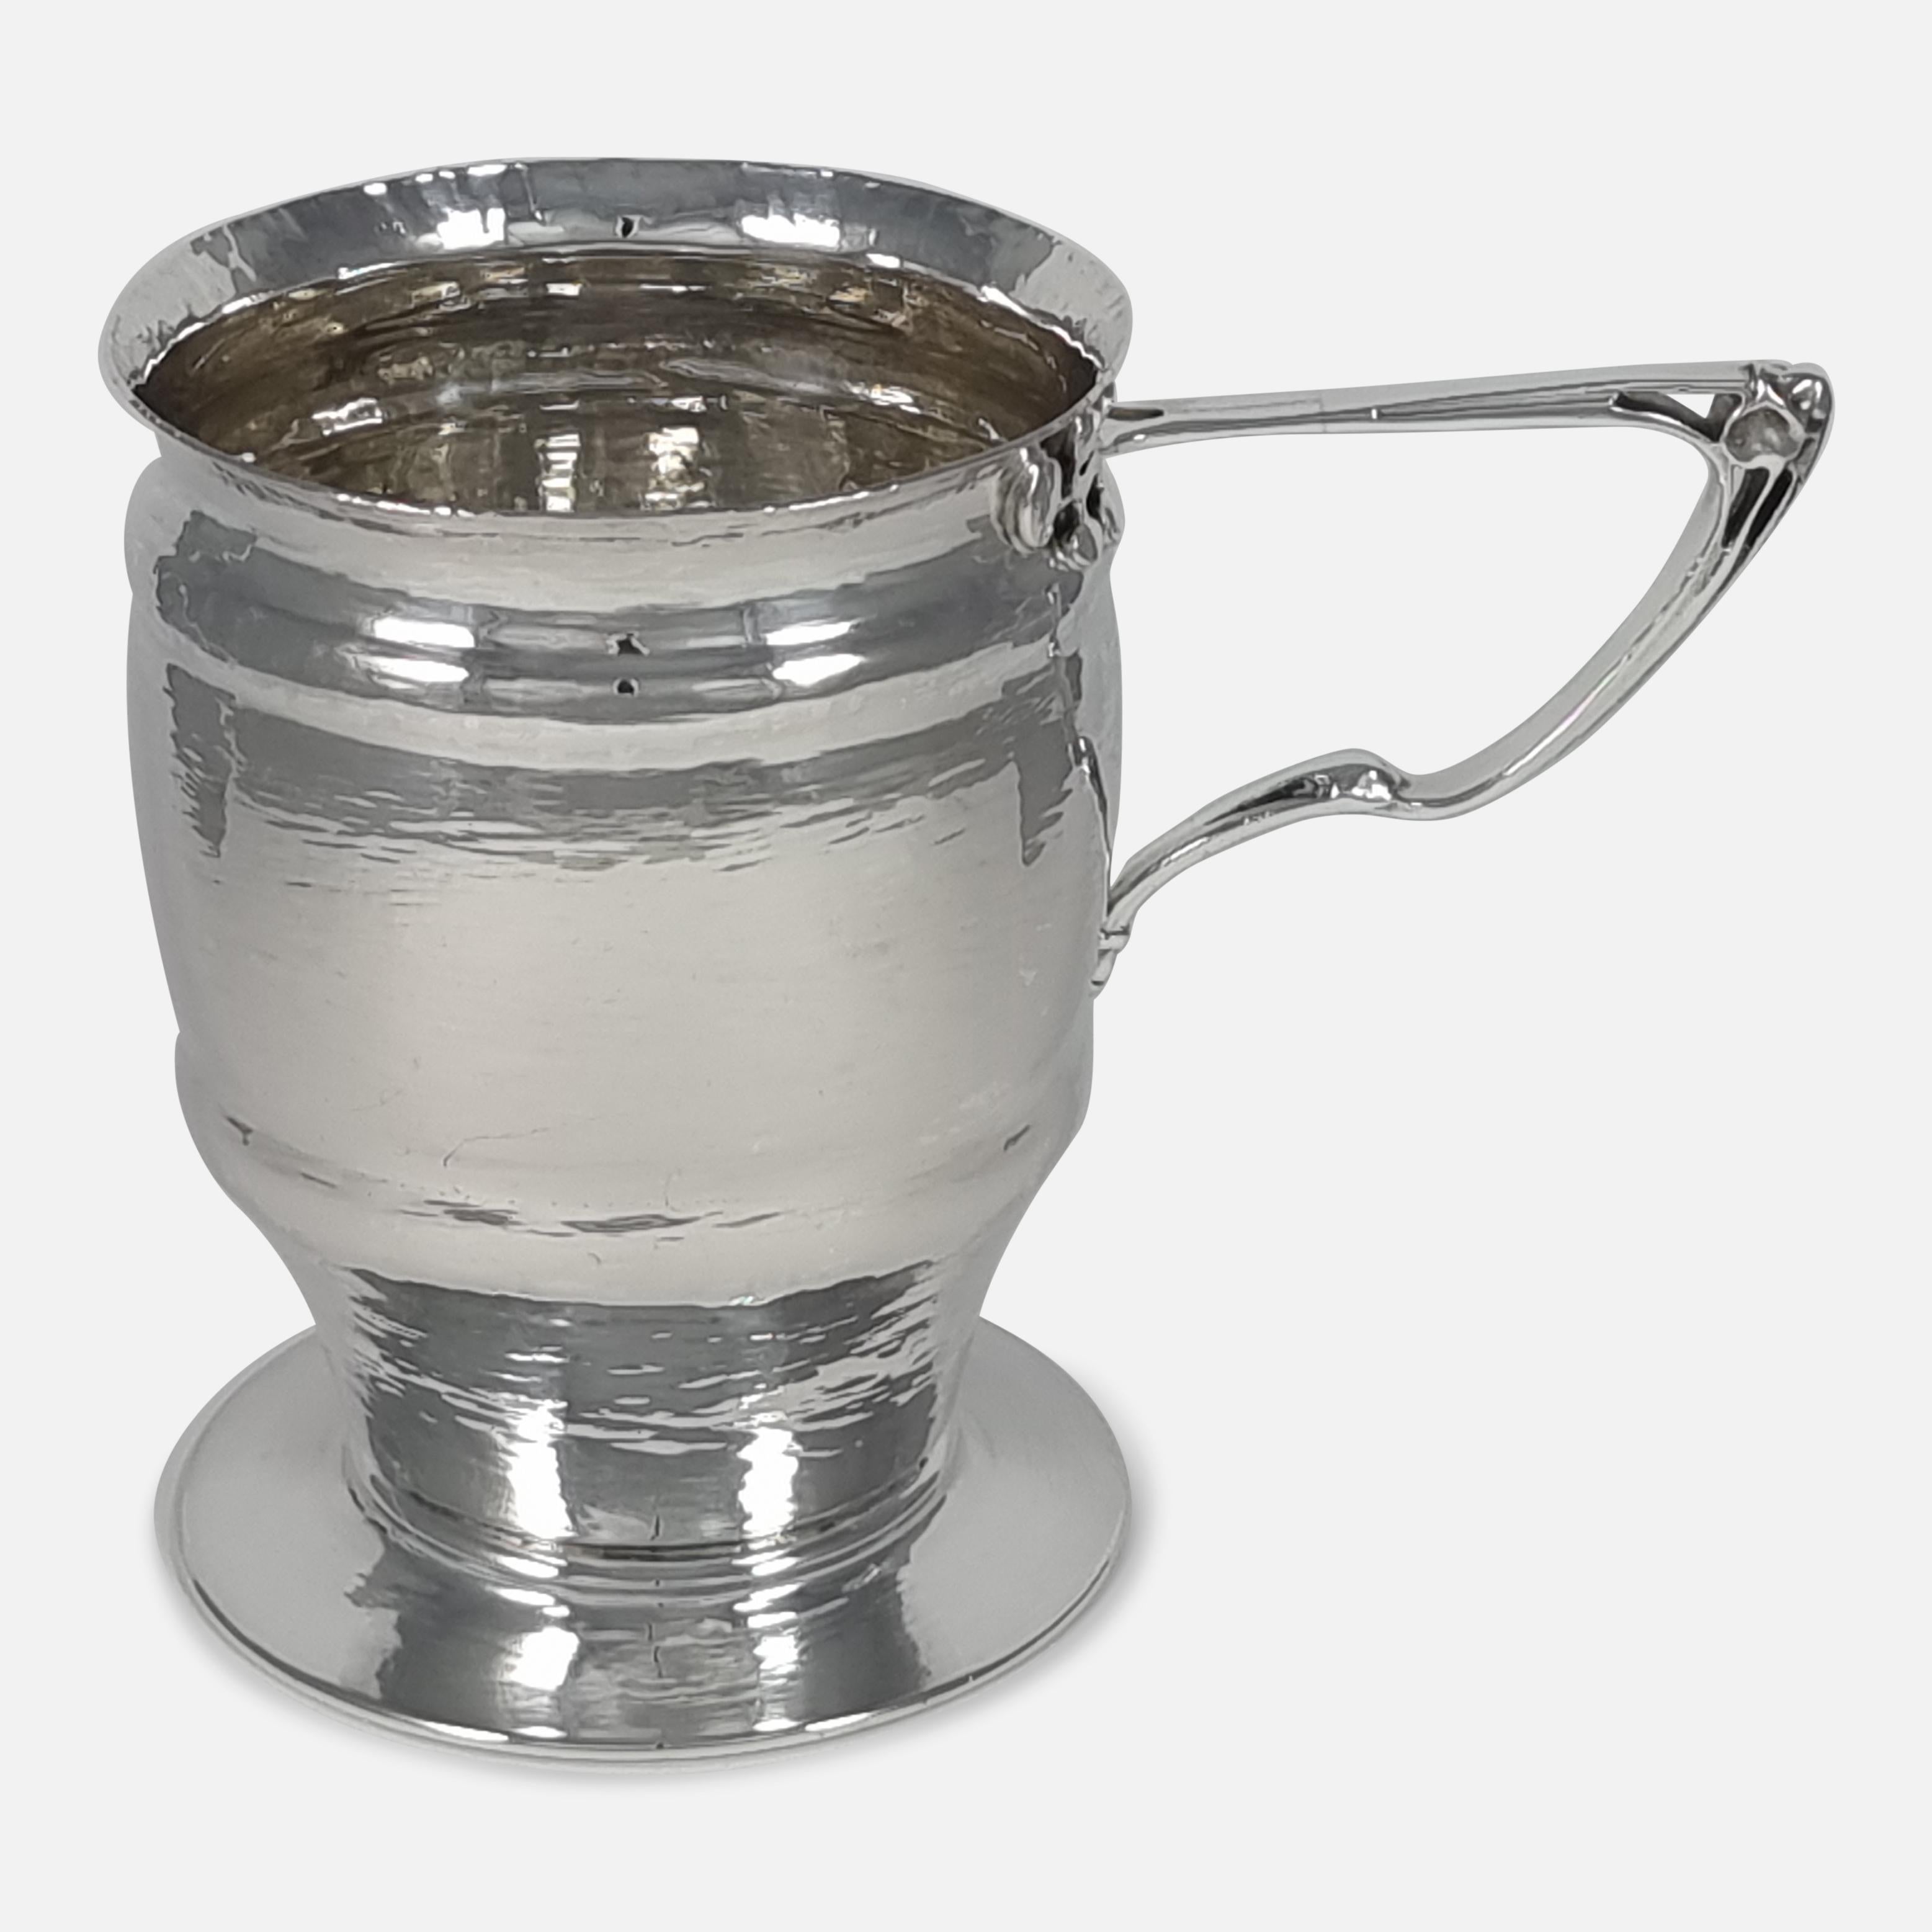 An Edwardian sterling silver mug in the Art Nouveau style. The mug is of planished and double ogee banded beaker form, with a spreading foot, the bisecting pierced handle is of an naturalistic whiplash design.

Assay: - .925 (Sterling